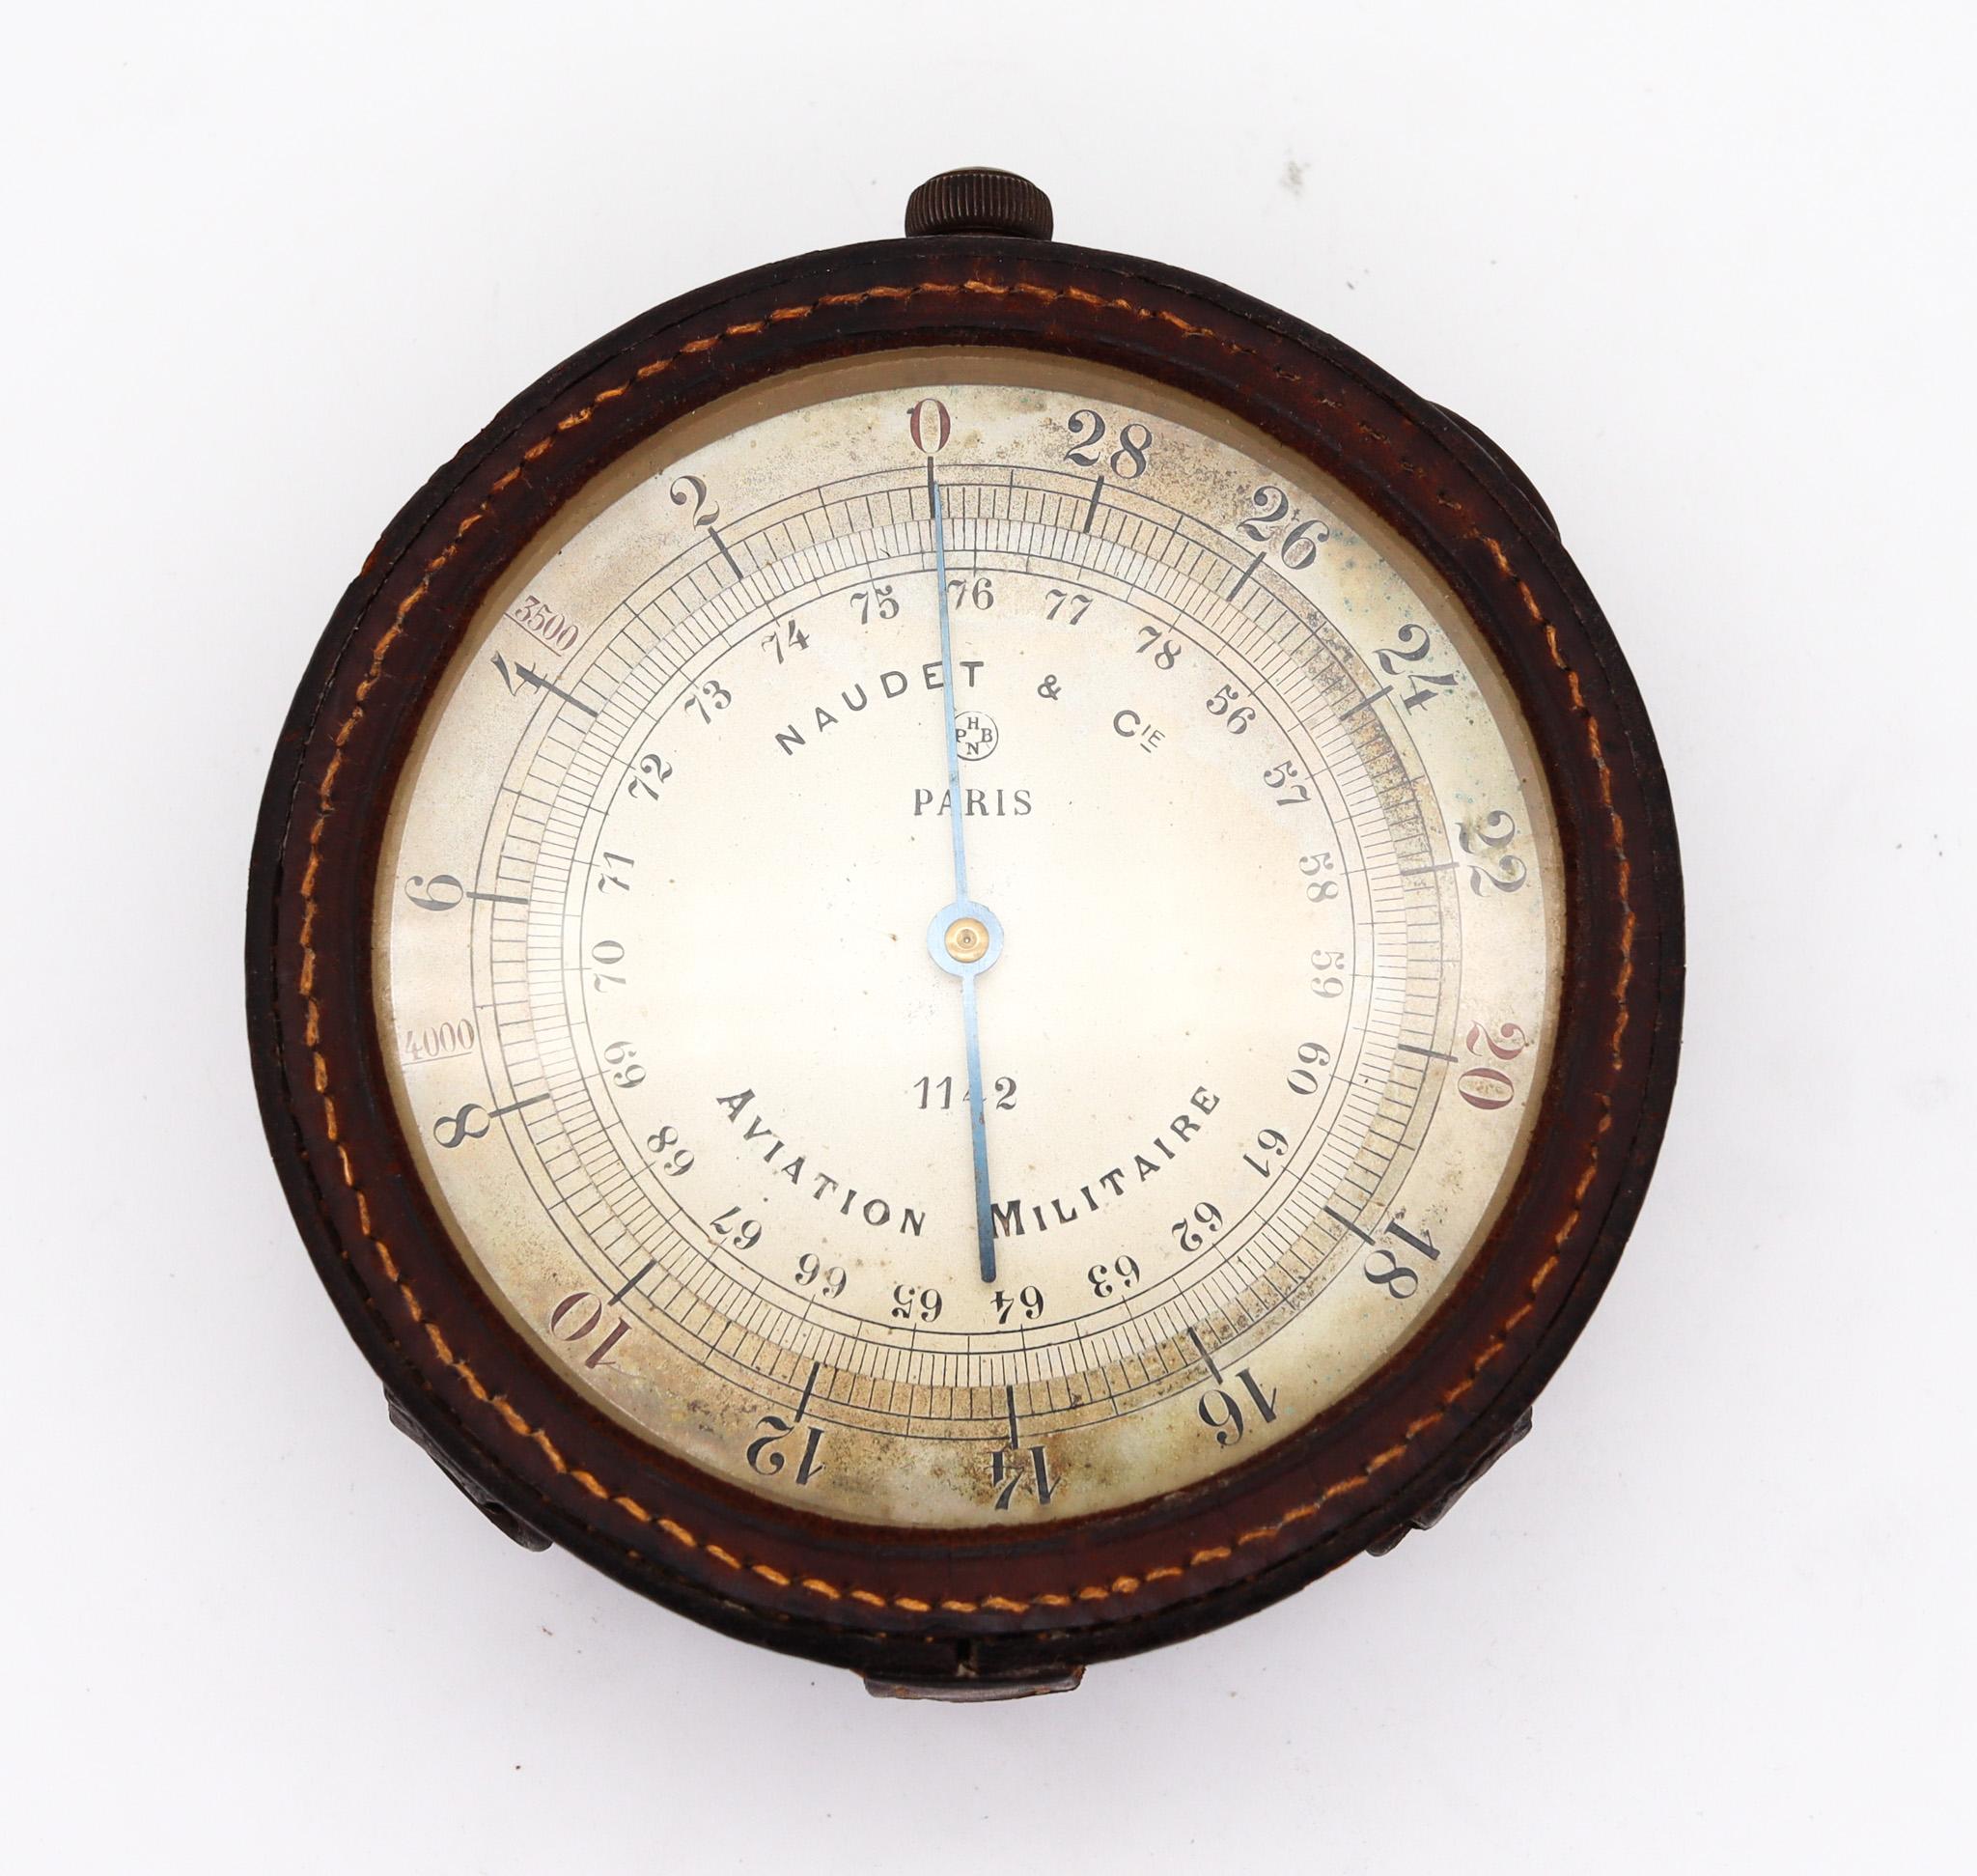 Naudet & Co. 1915-1916 Paris World War I French Aviation Altimeter Militaire In Excellent Condition For Sale In Miami, FL